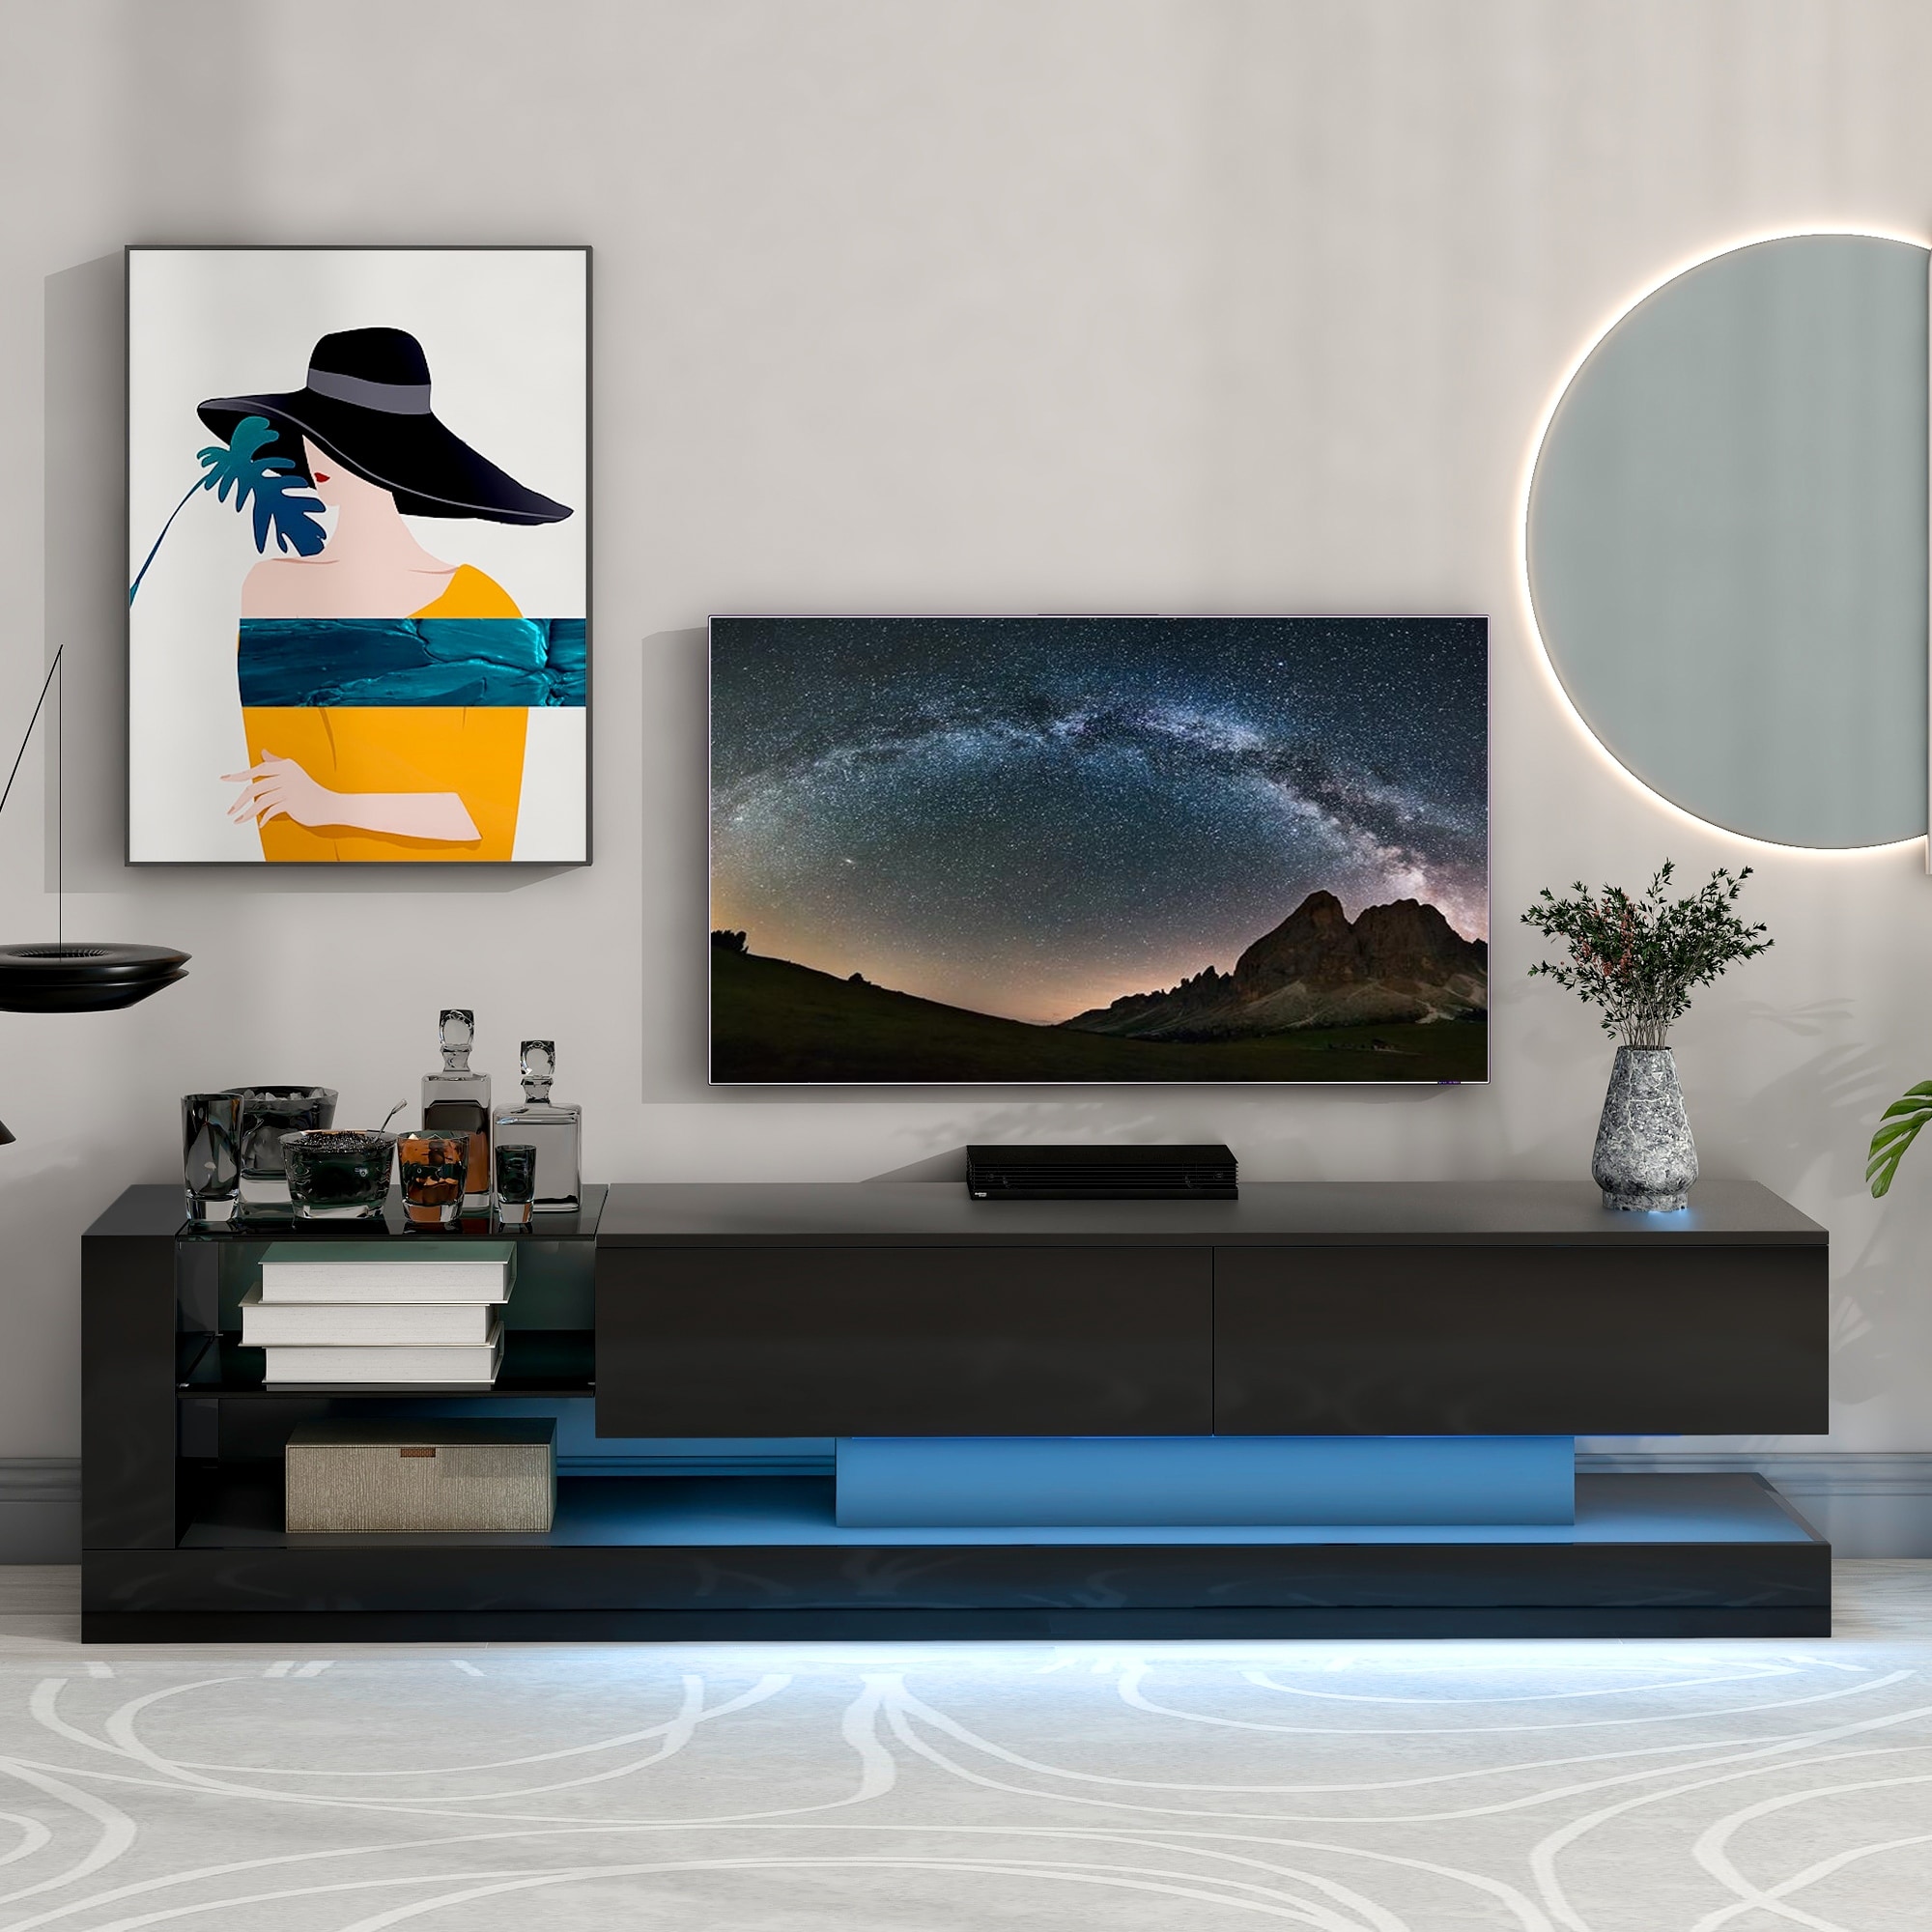 https://ak1.ostkcdn.com/images/products/is/images/direct/6f7595b3cc72c83beaf1c7ab179bc7e1750cedc6/Modern-Minimalist-style-70%22-TV-Stand-with-16-Color-RGB-LED-Light-%26-2-Media-Storage-Cabinets%2C-Classic-TV-Cabinet-for-Living-Room.jpg